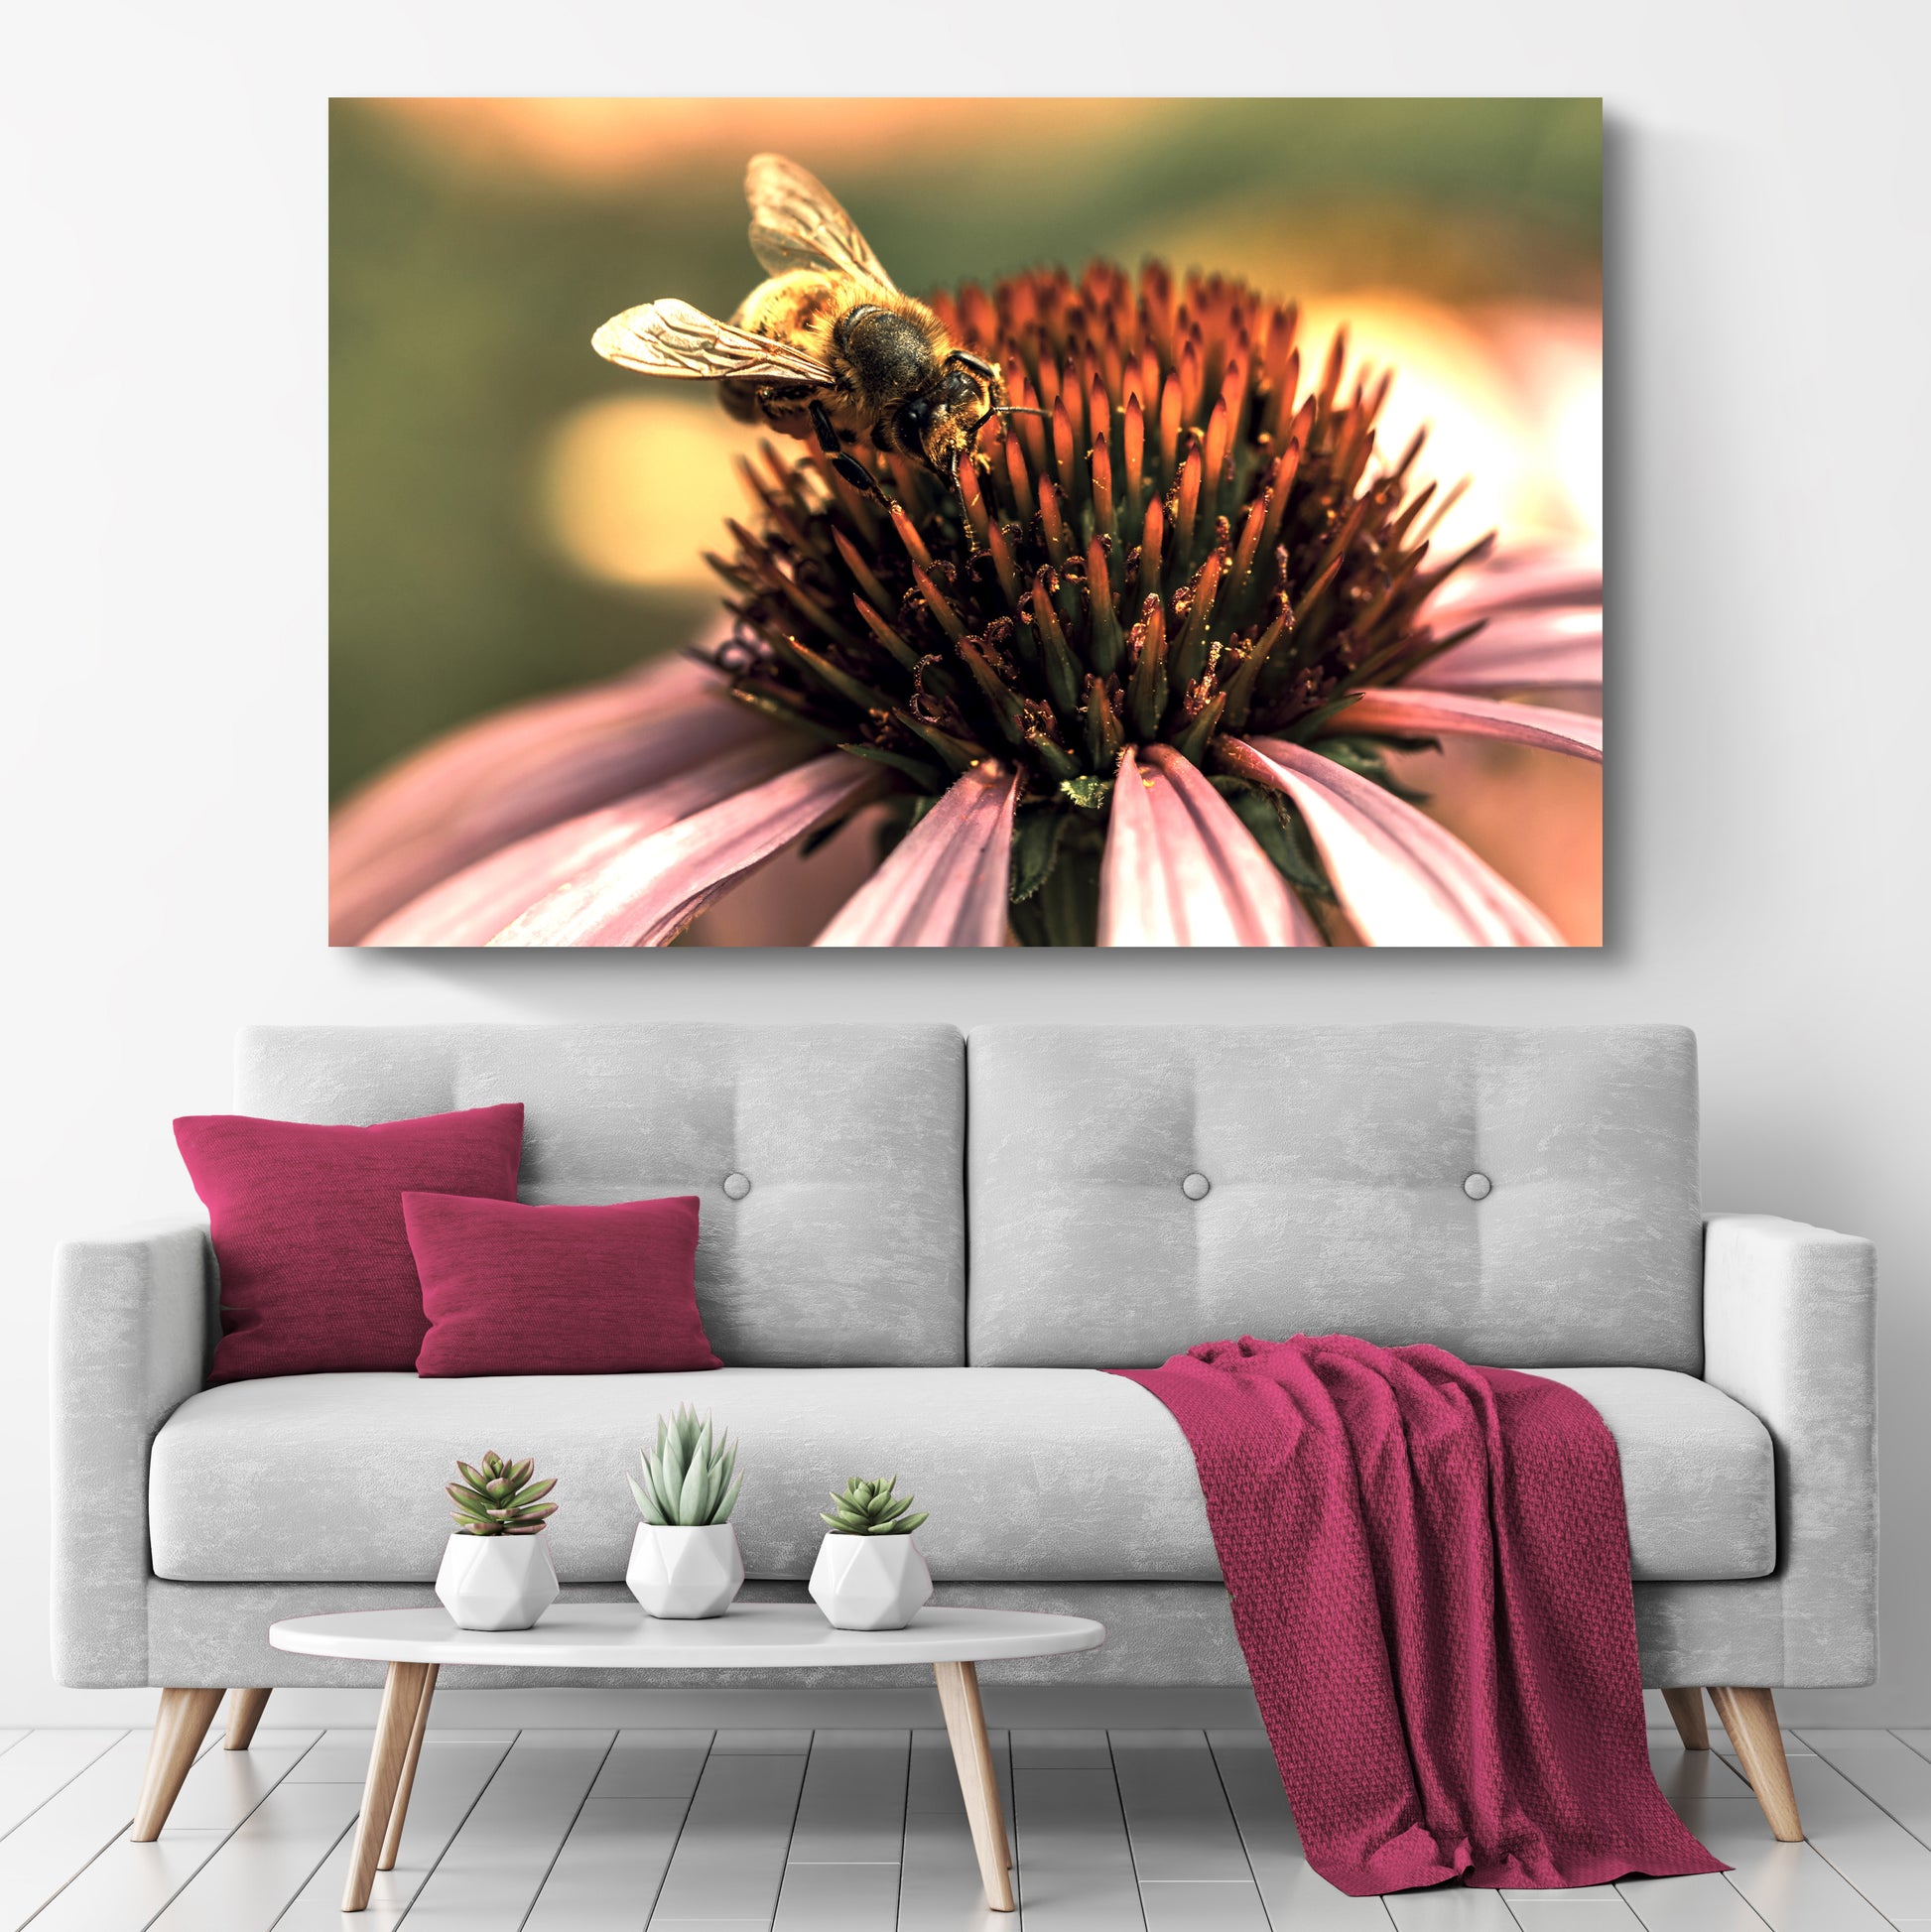 Bee On Coneflower Canvas Wall Art Style 2 - Image by Tailored Canvases